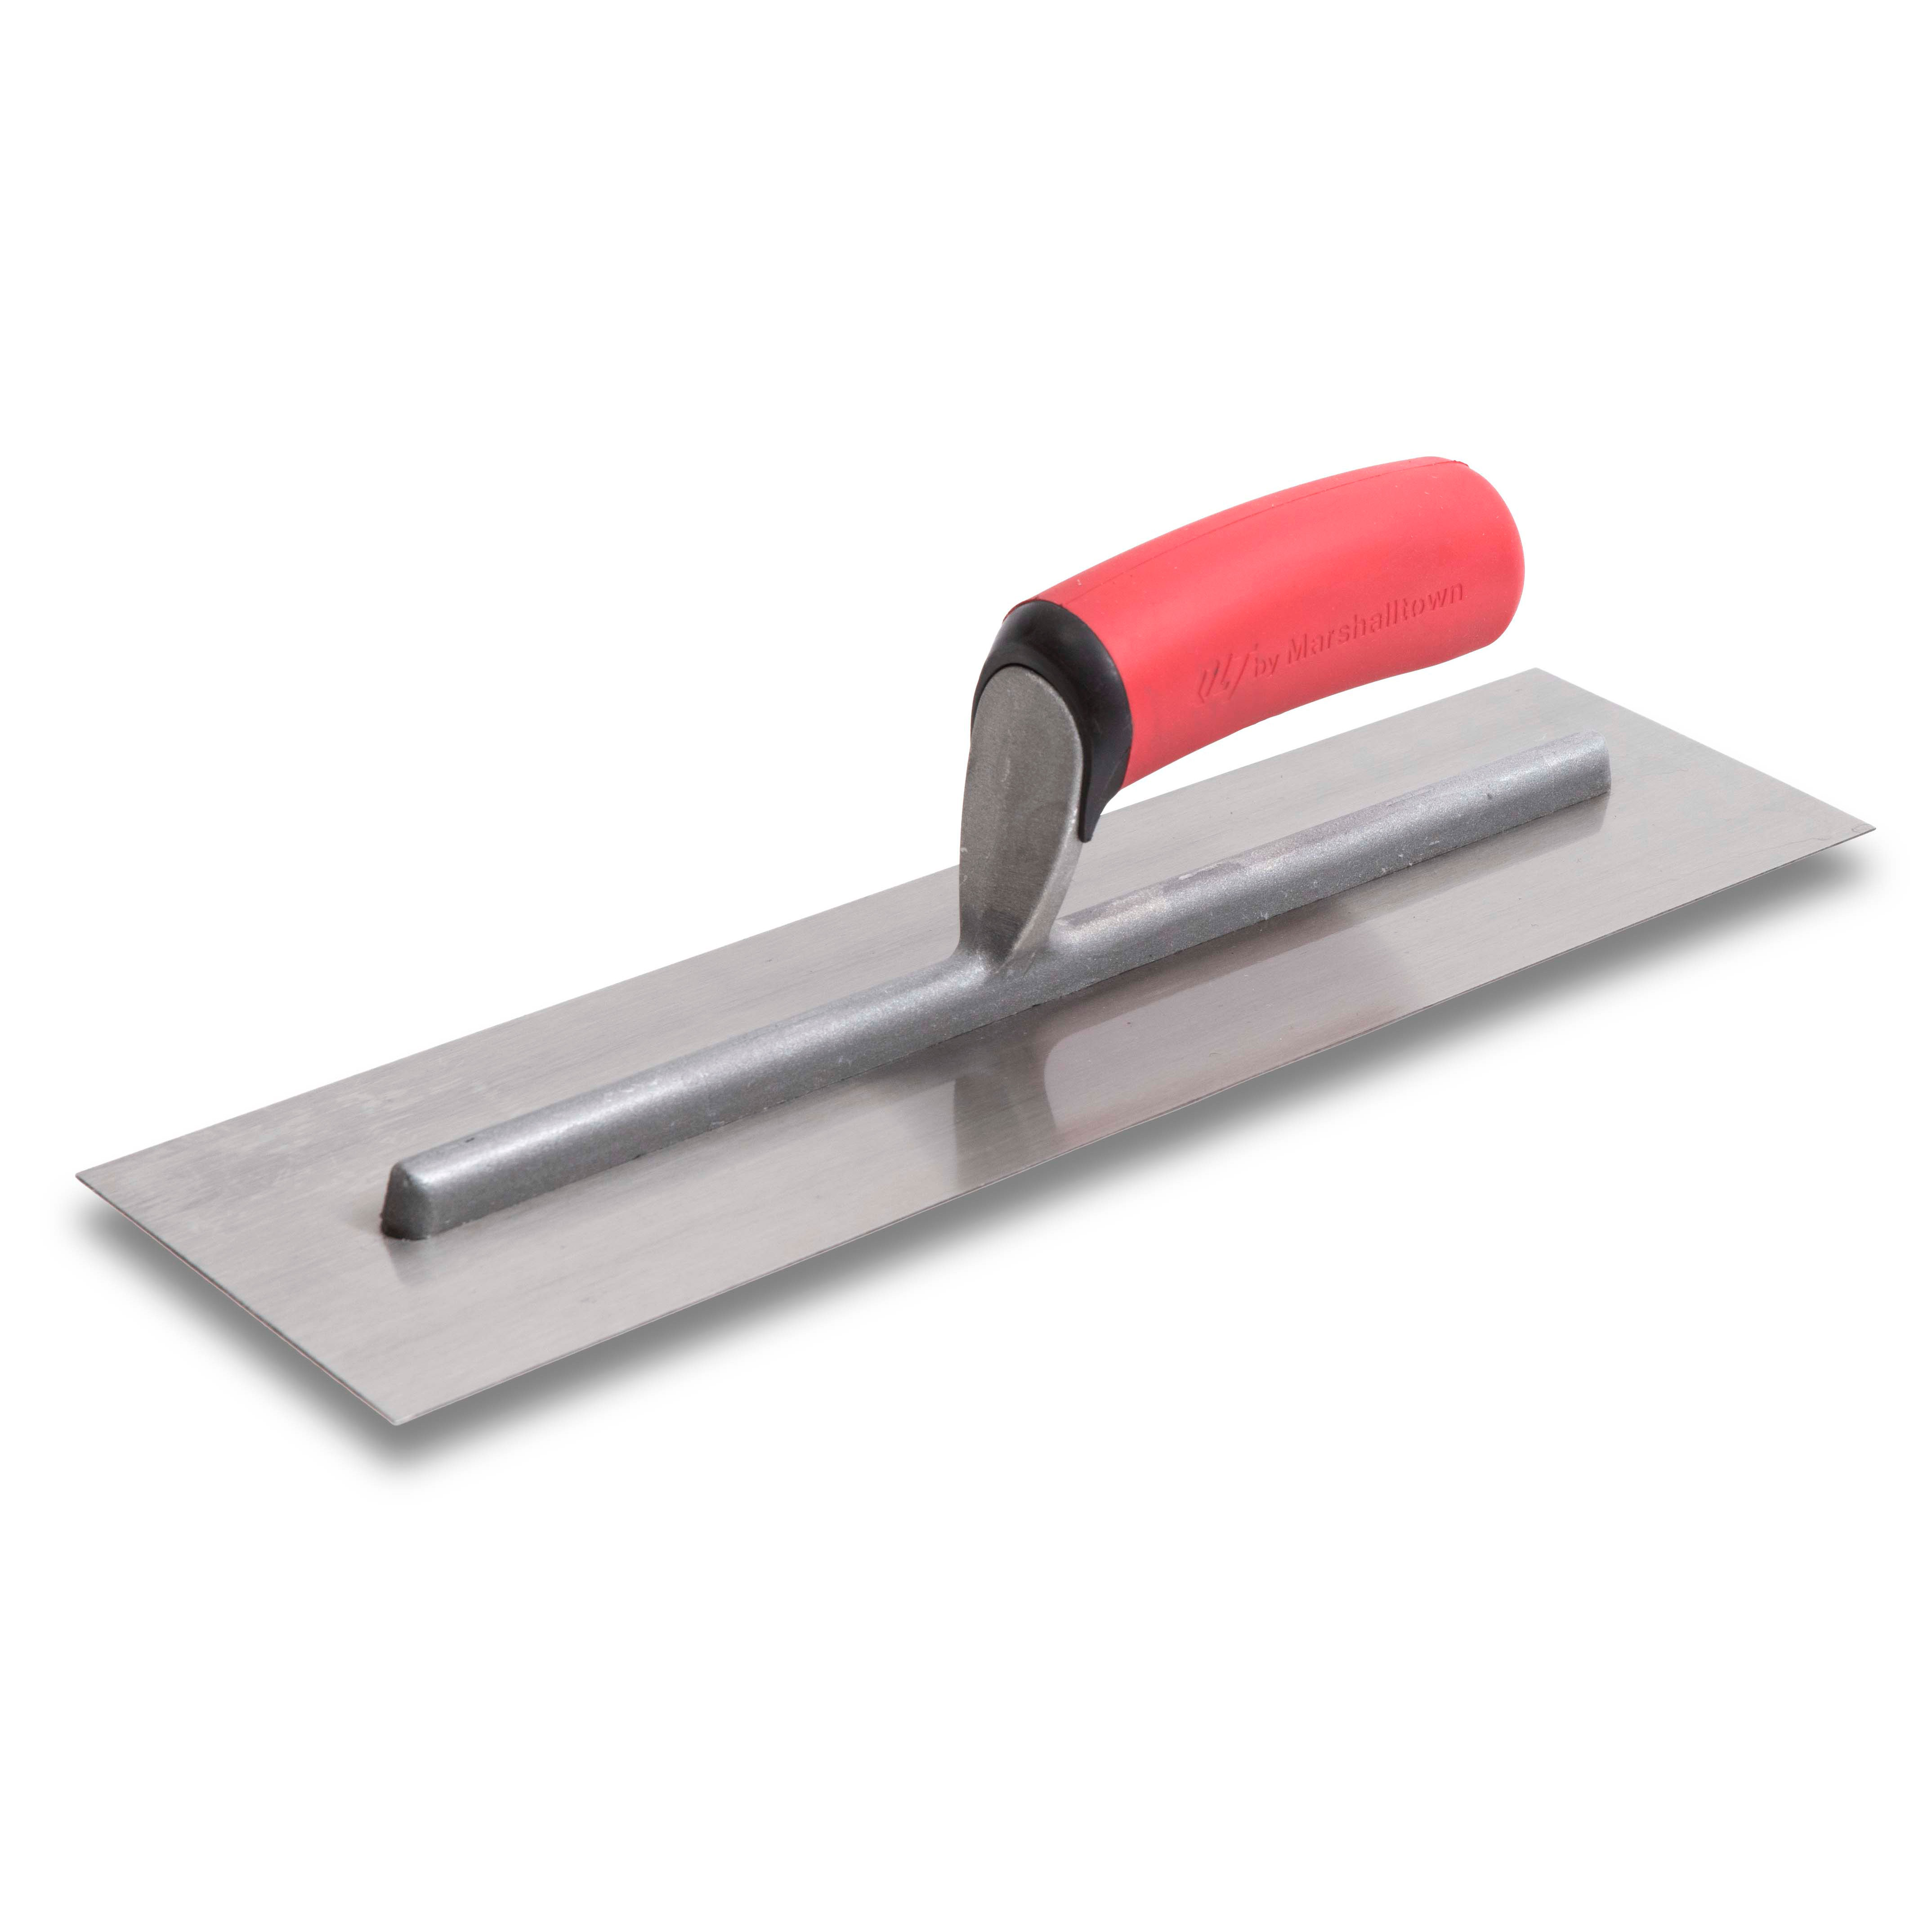 Marshalltown FT144 14in x 4in Finishing Trowel with Soft Grip Handle FT144